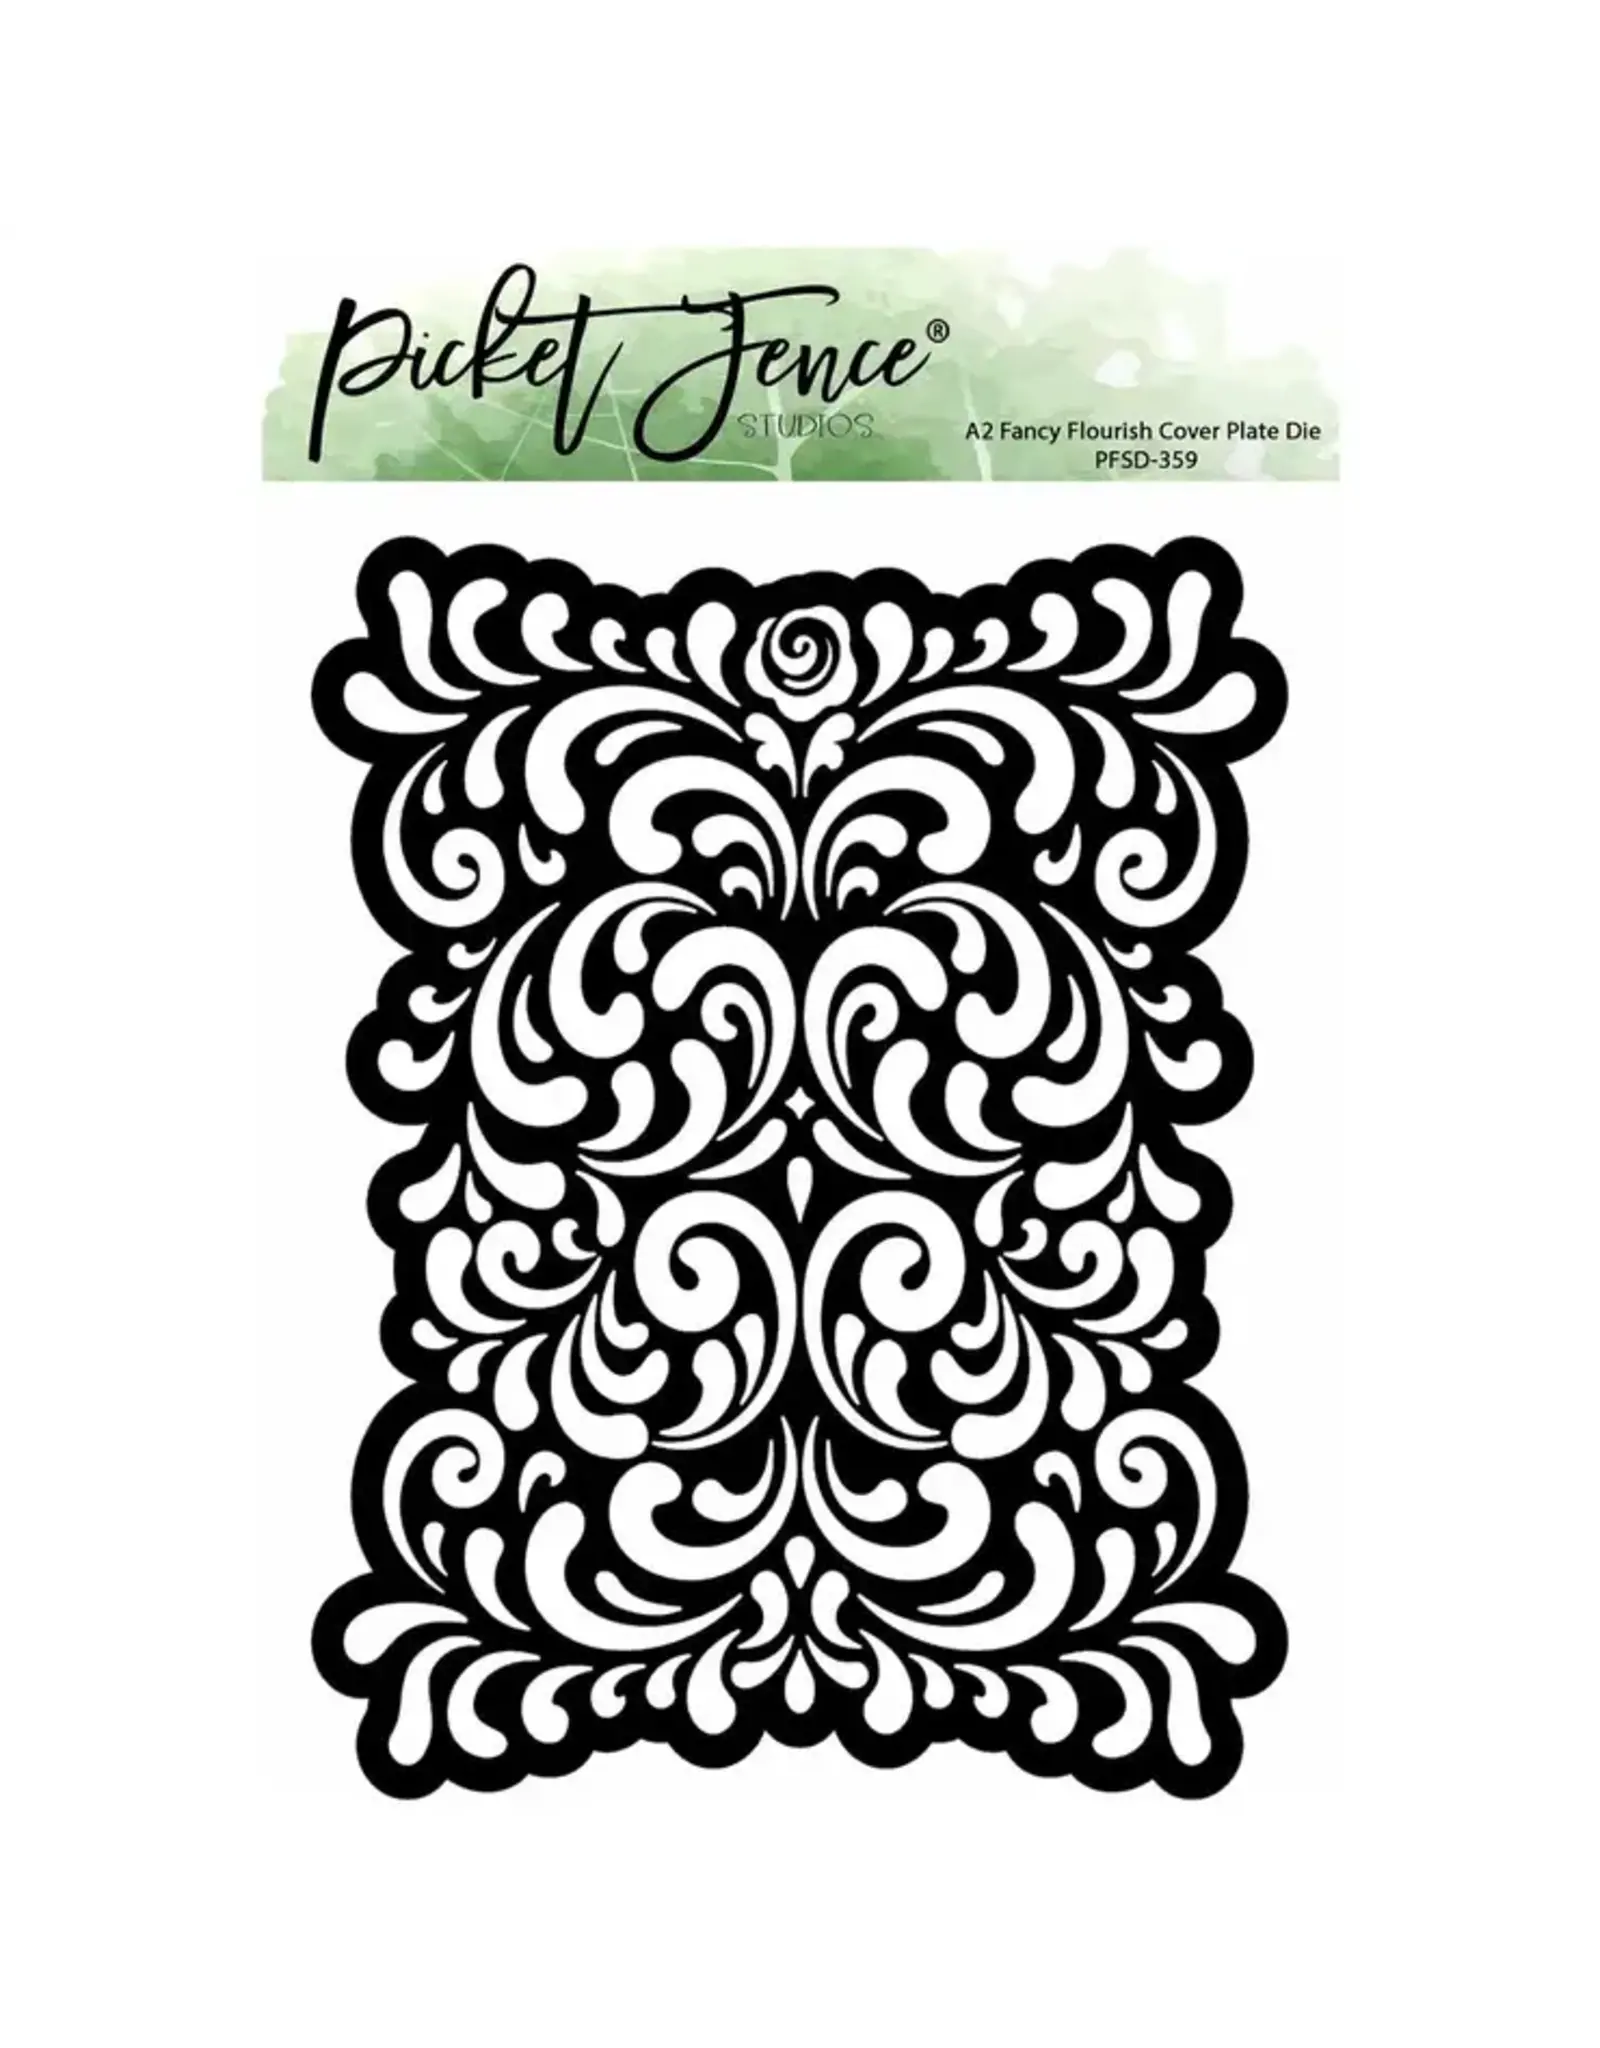 PICKET FENCE PICKET FENCE STUDIOS A2 FANCY FLOURISH COVER PLATE DIE